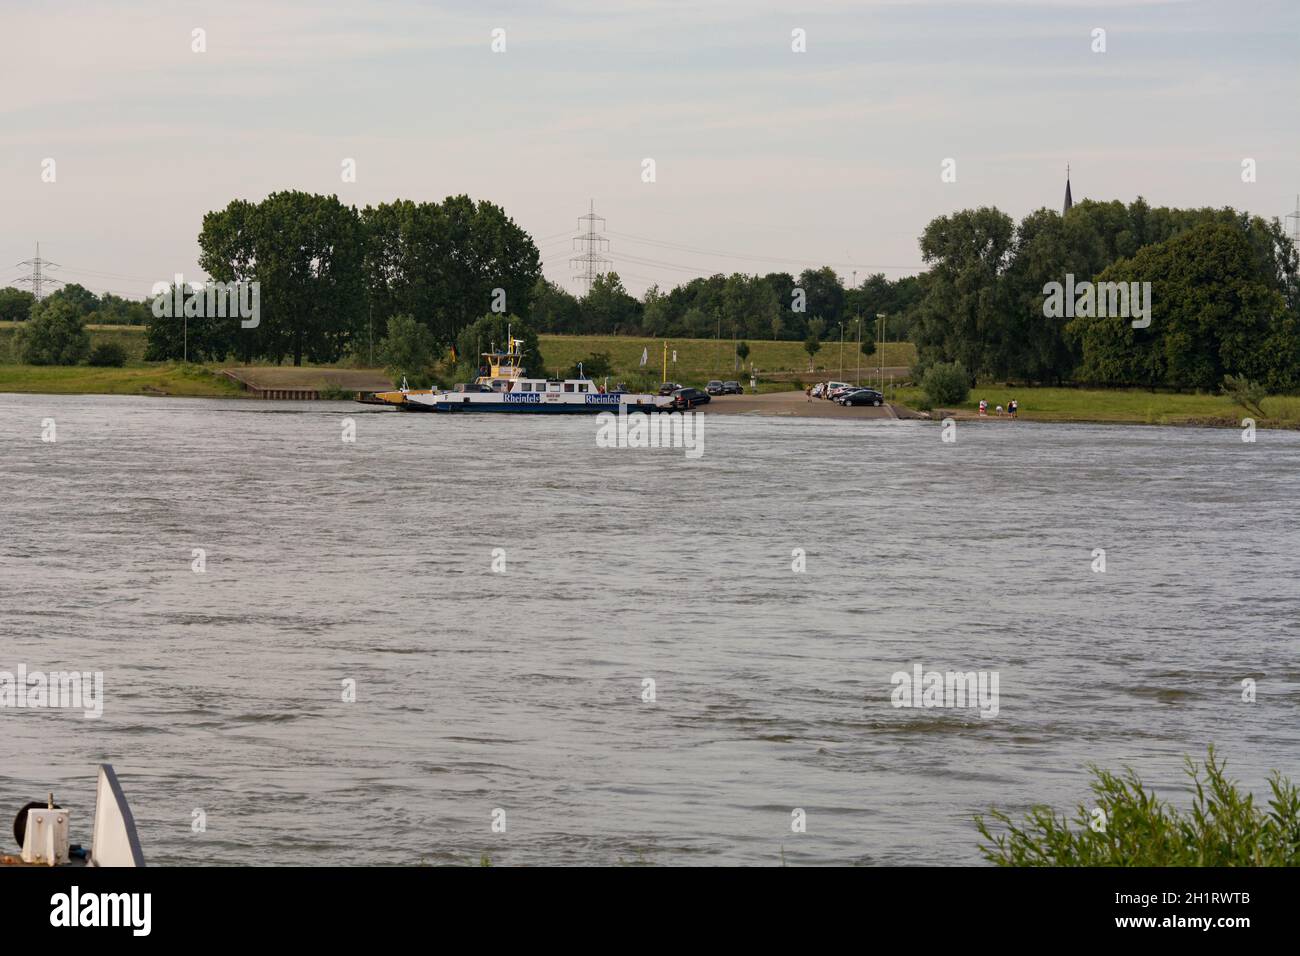 ORSOY, NRW, GERMANY - JUNE 23, 2019:  Ferry City Orsoy on the Rhine. The ferry connects Orsoy in NRW, the city of Duisburg Walsum. Some passengers on Stock Photo